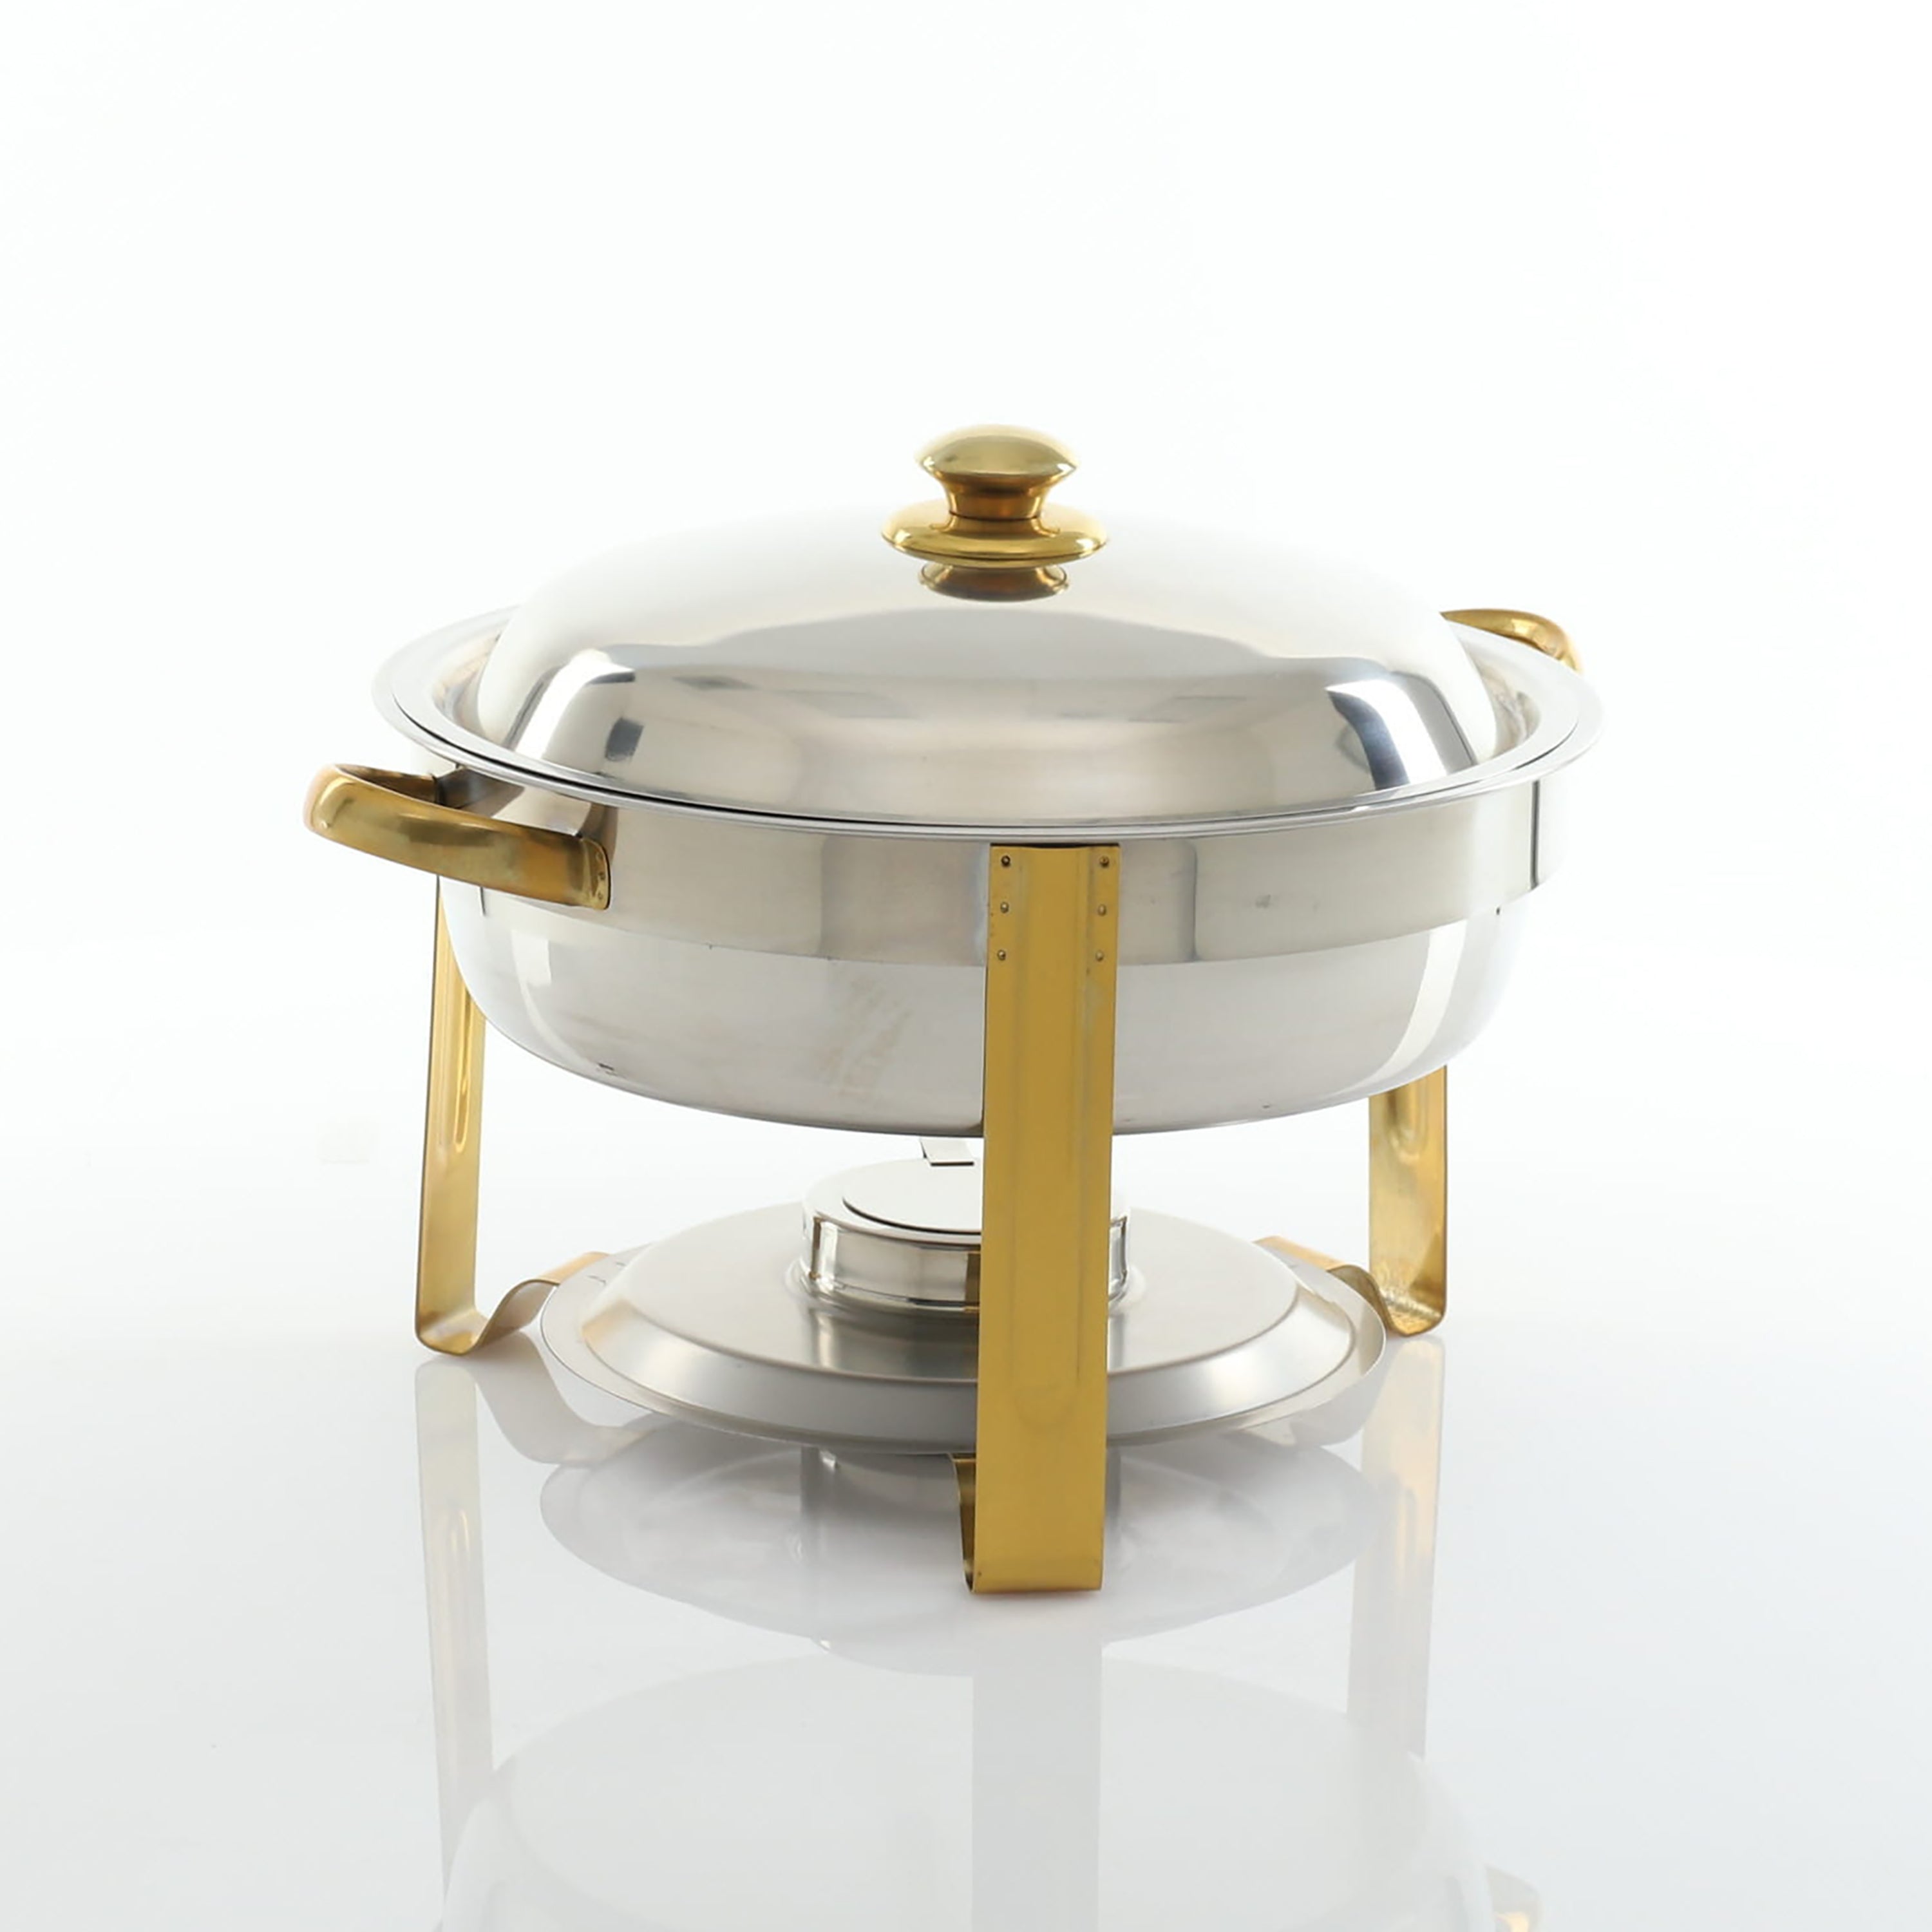 Adcraft GRY-4 Chafing Dish